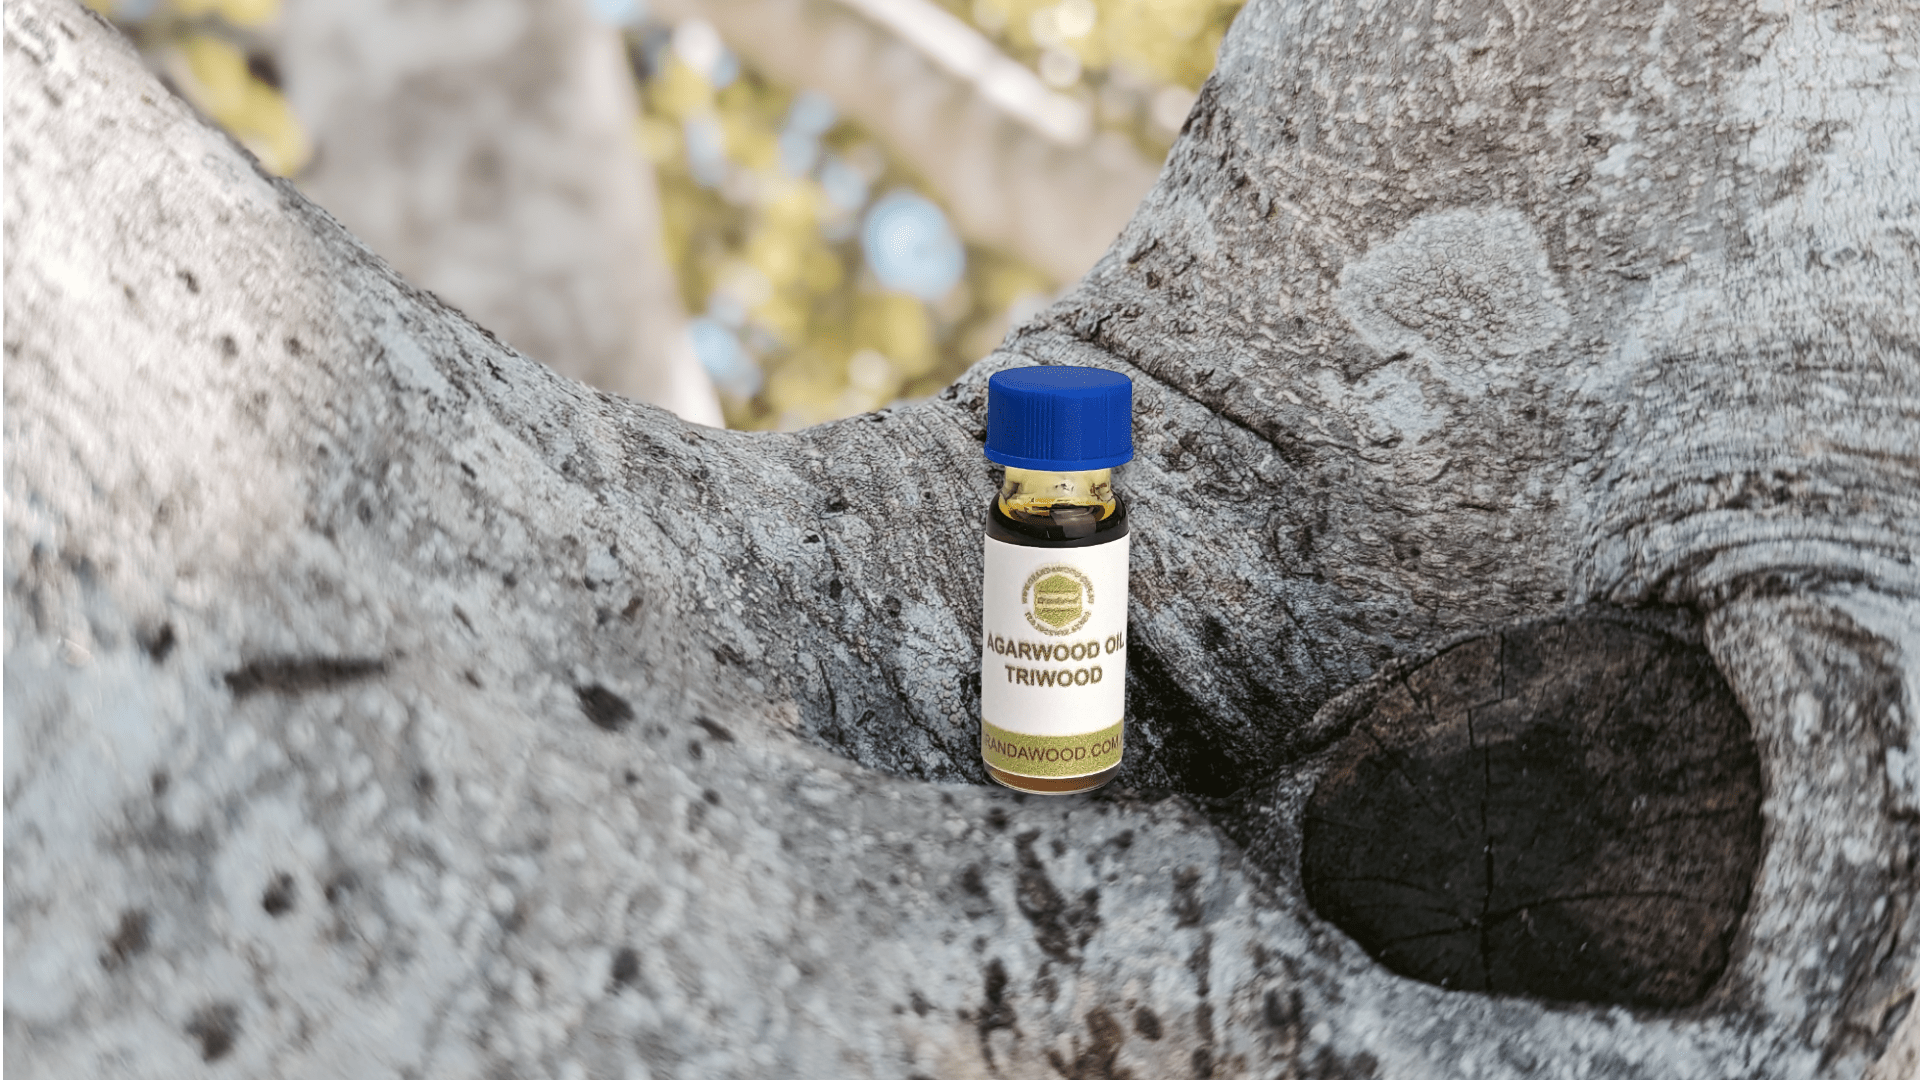 *New* Triwood - the Amazing Aroma of Three Different Agarwood Species in one bottle - 1.5ml